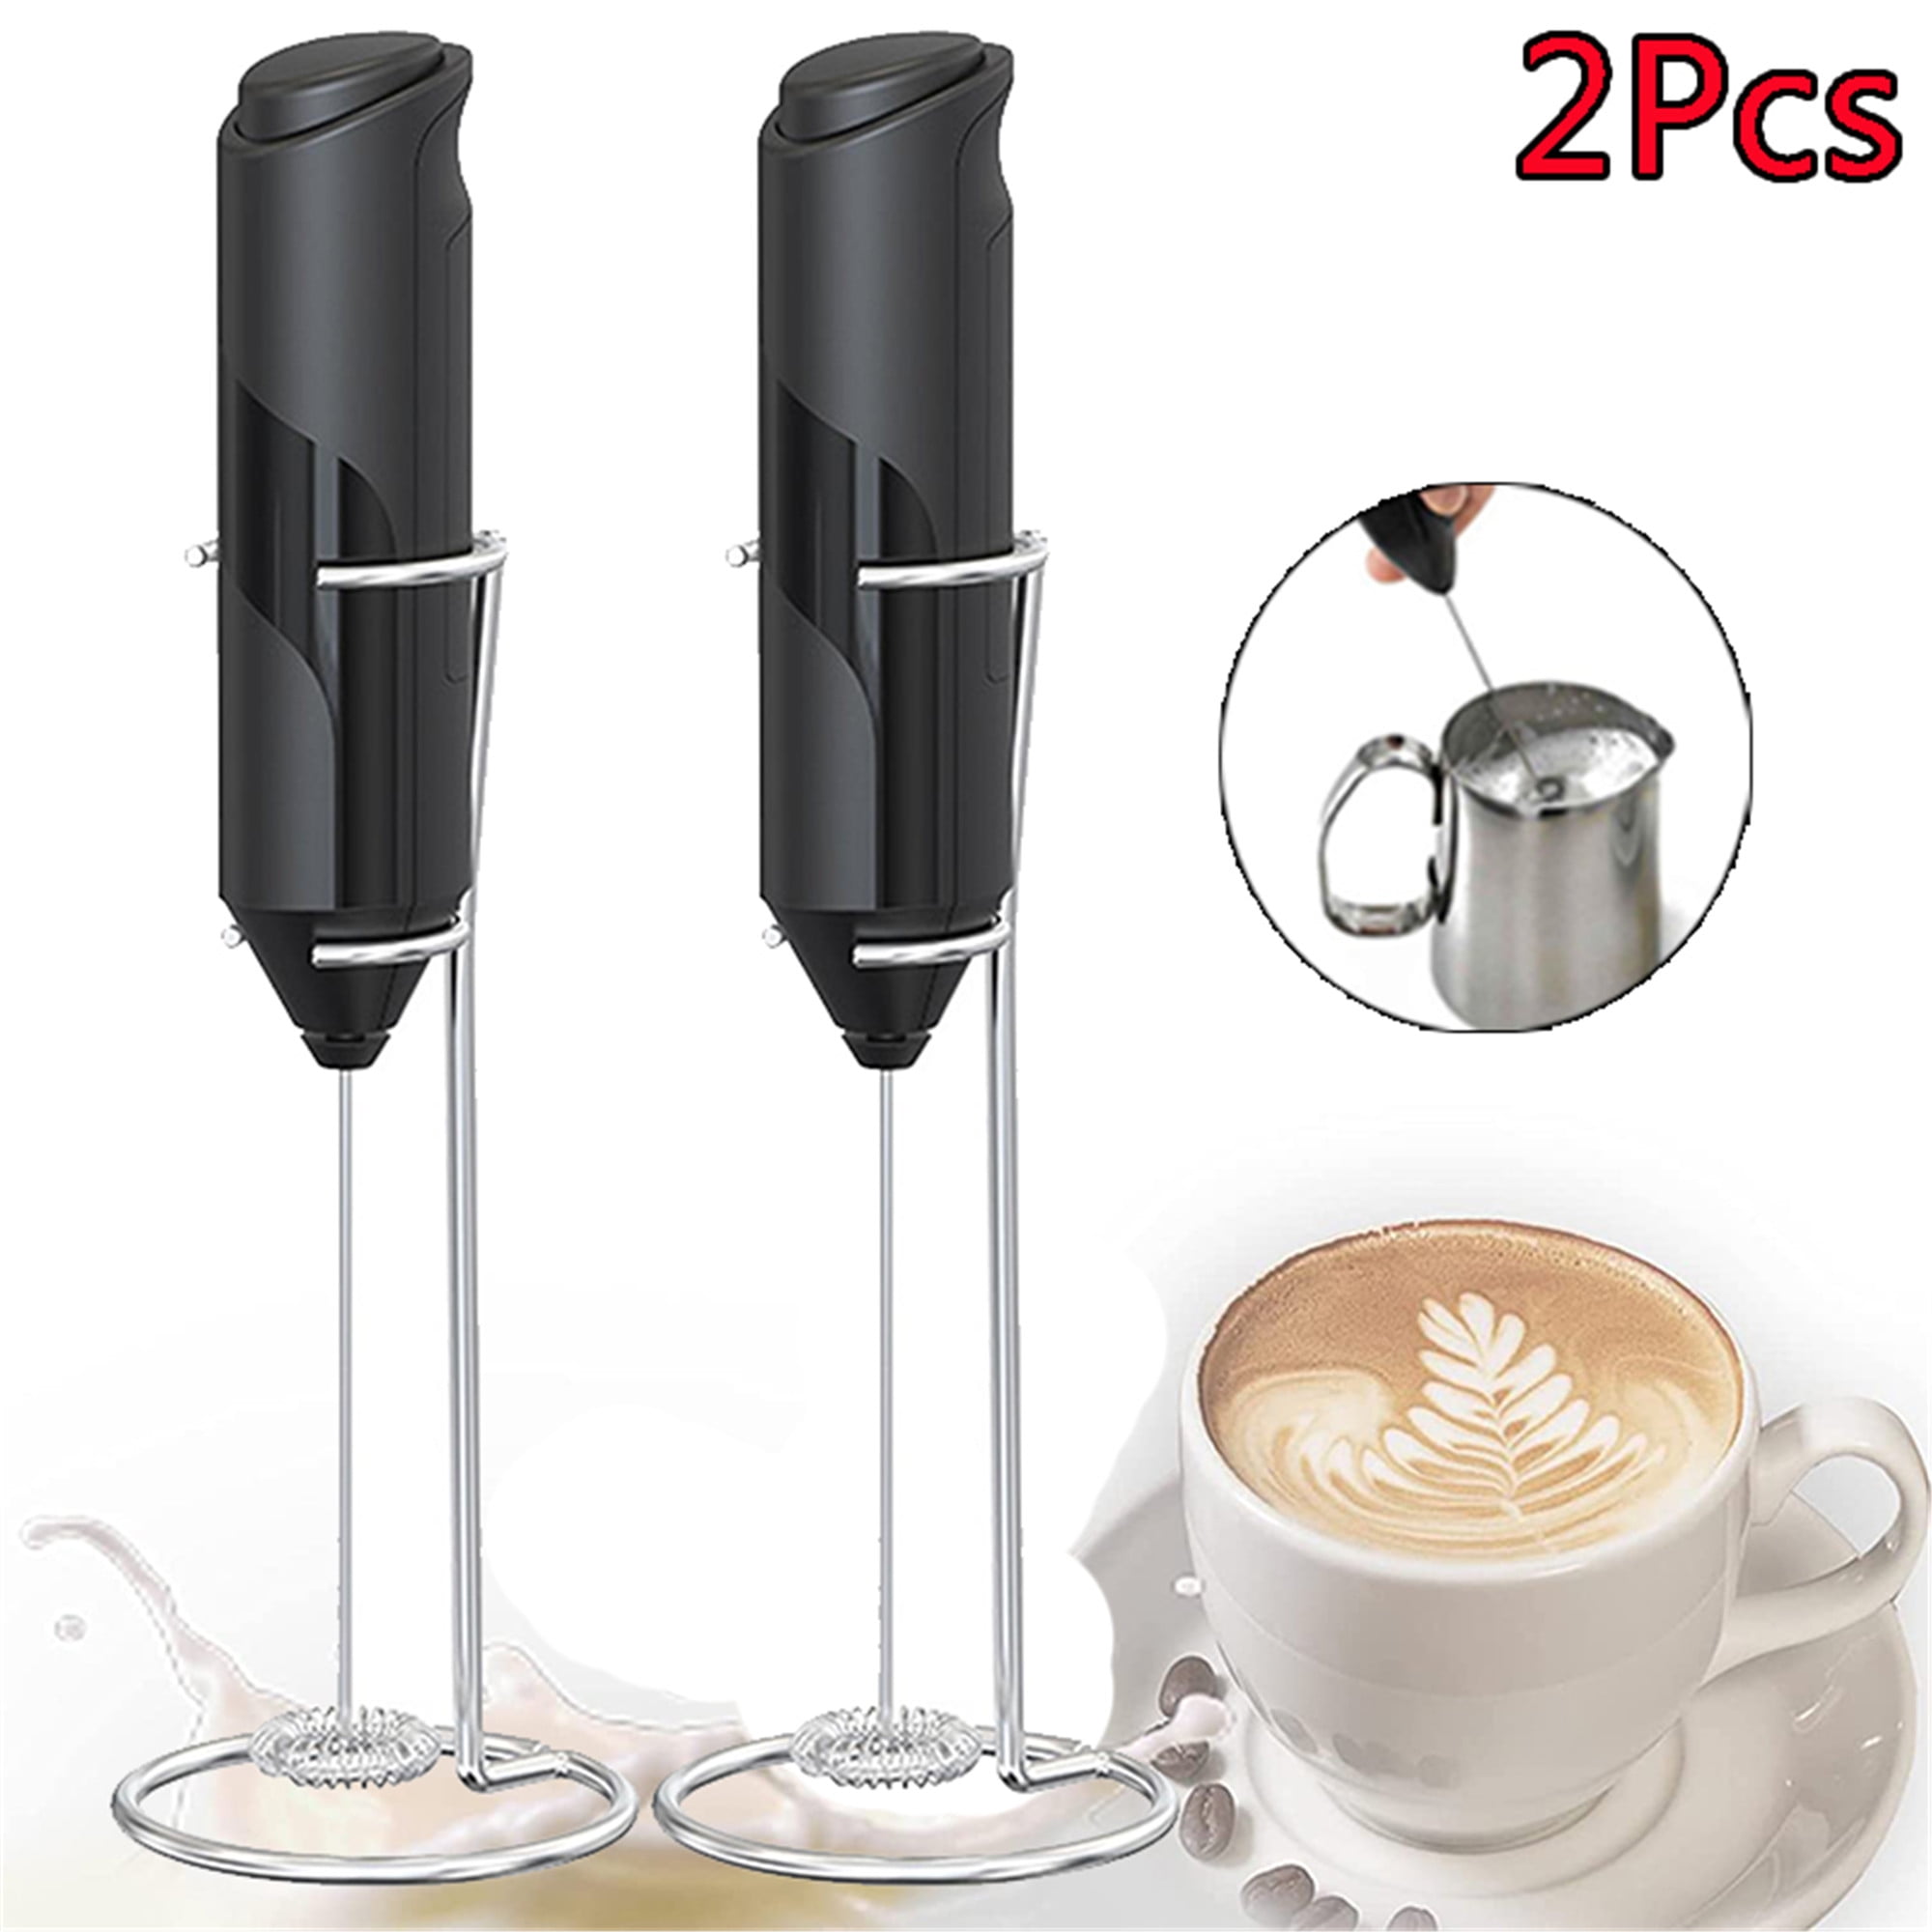 1pc Mini Handheld Coffee Stirrer Electric Mixer, Upgraded Battery